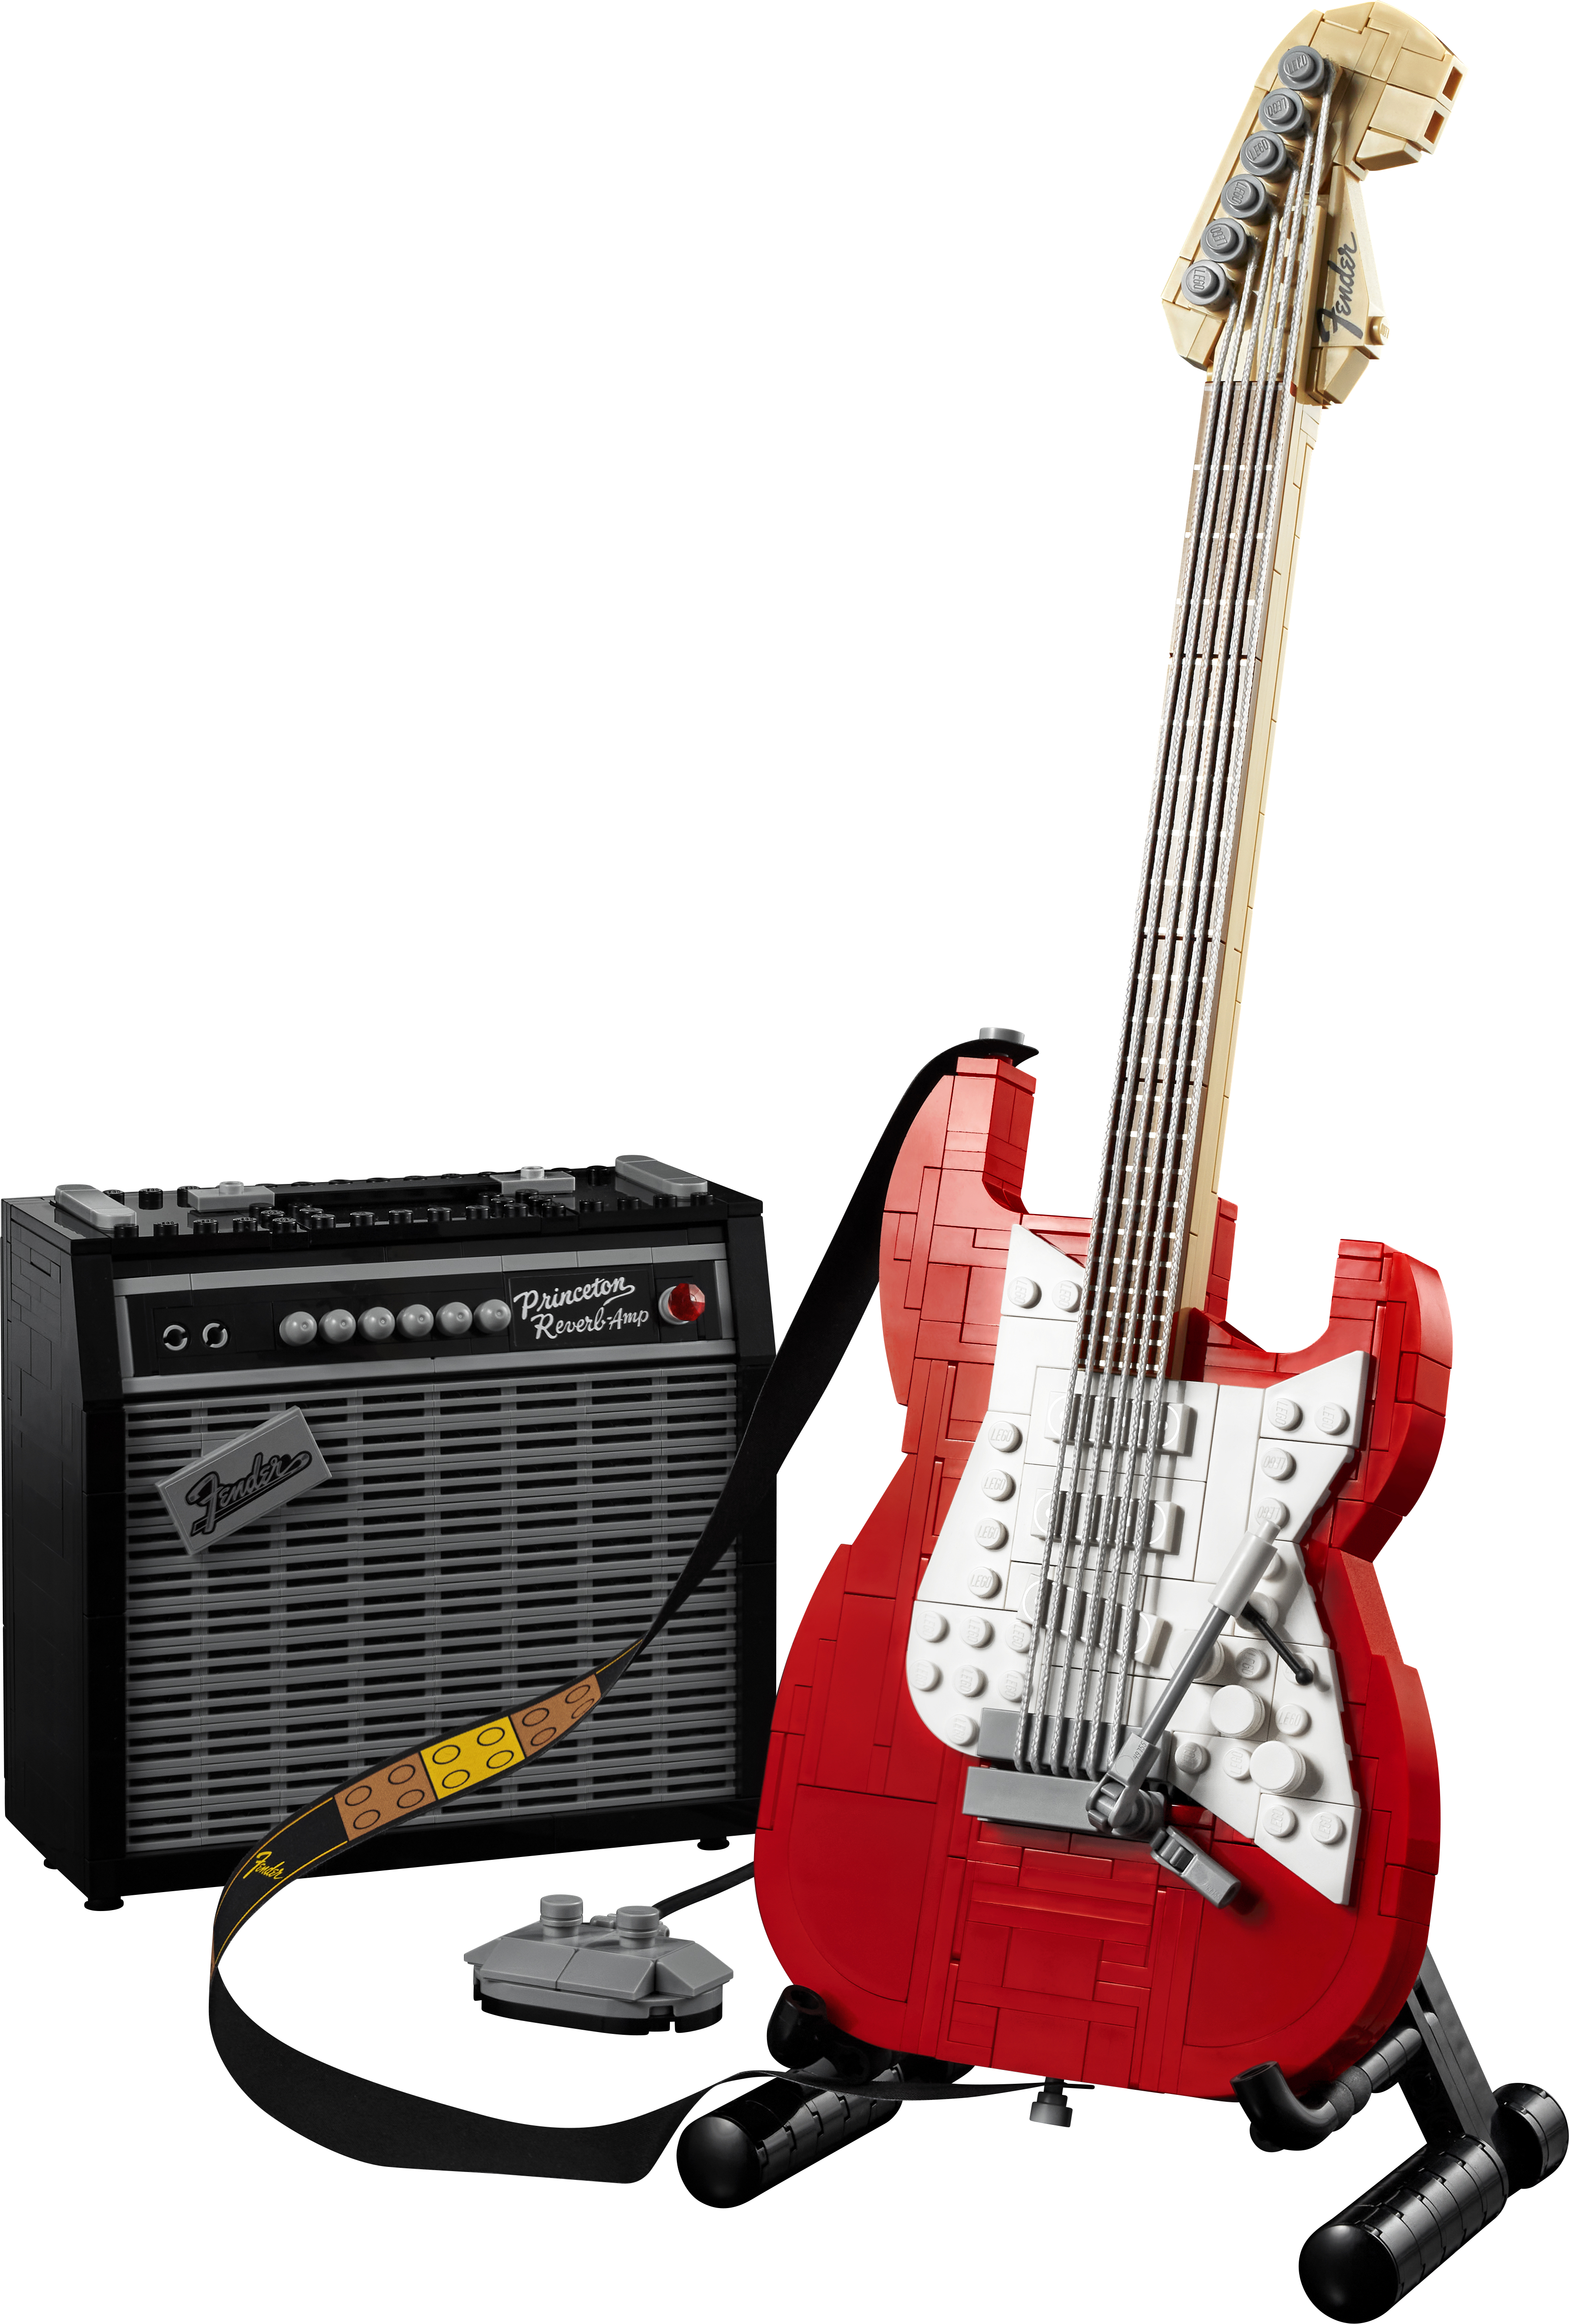 LEGO Ideas officially reveals 21329 Fender Stratocaster buildable